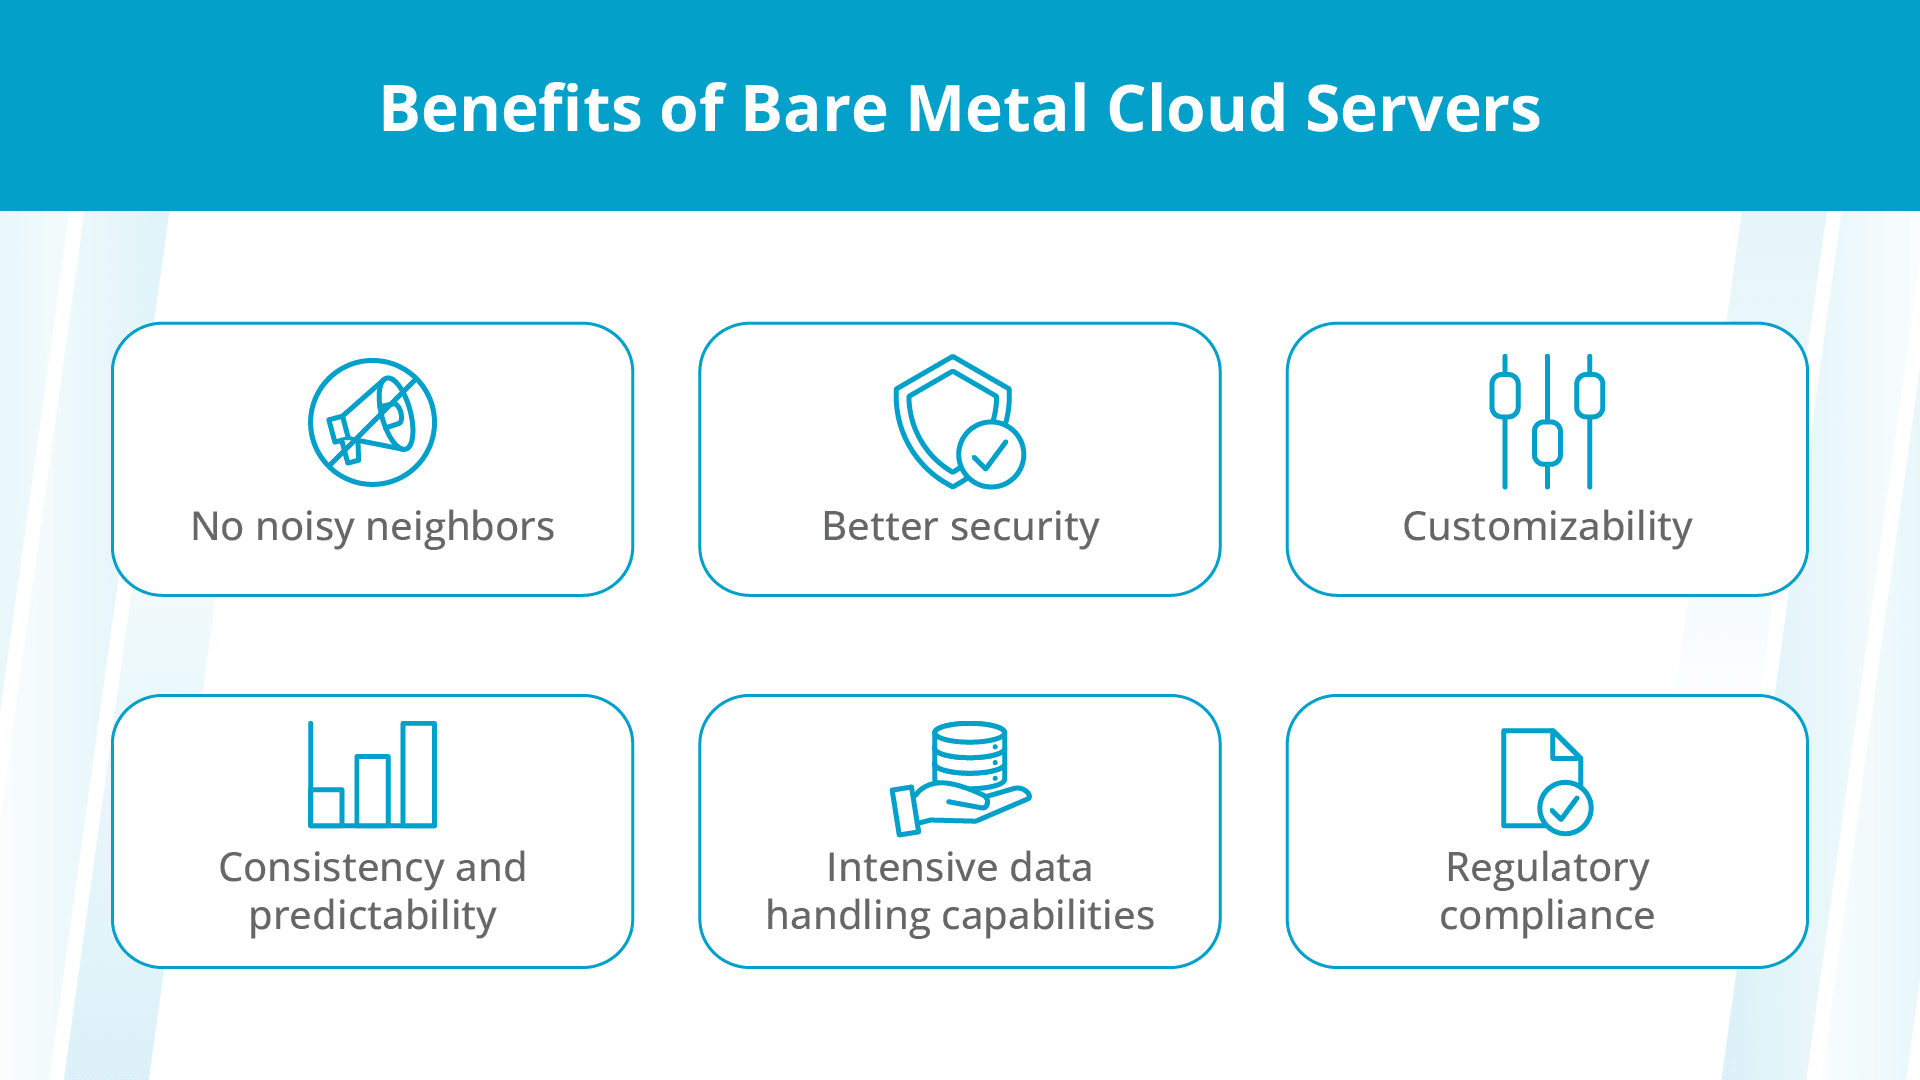 The benefits of using bare metal cloud servers.